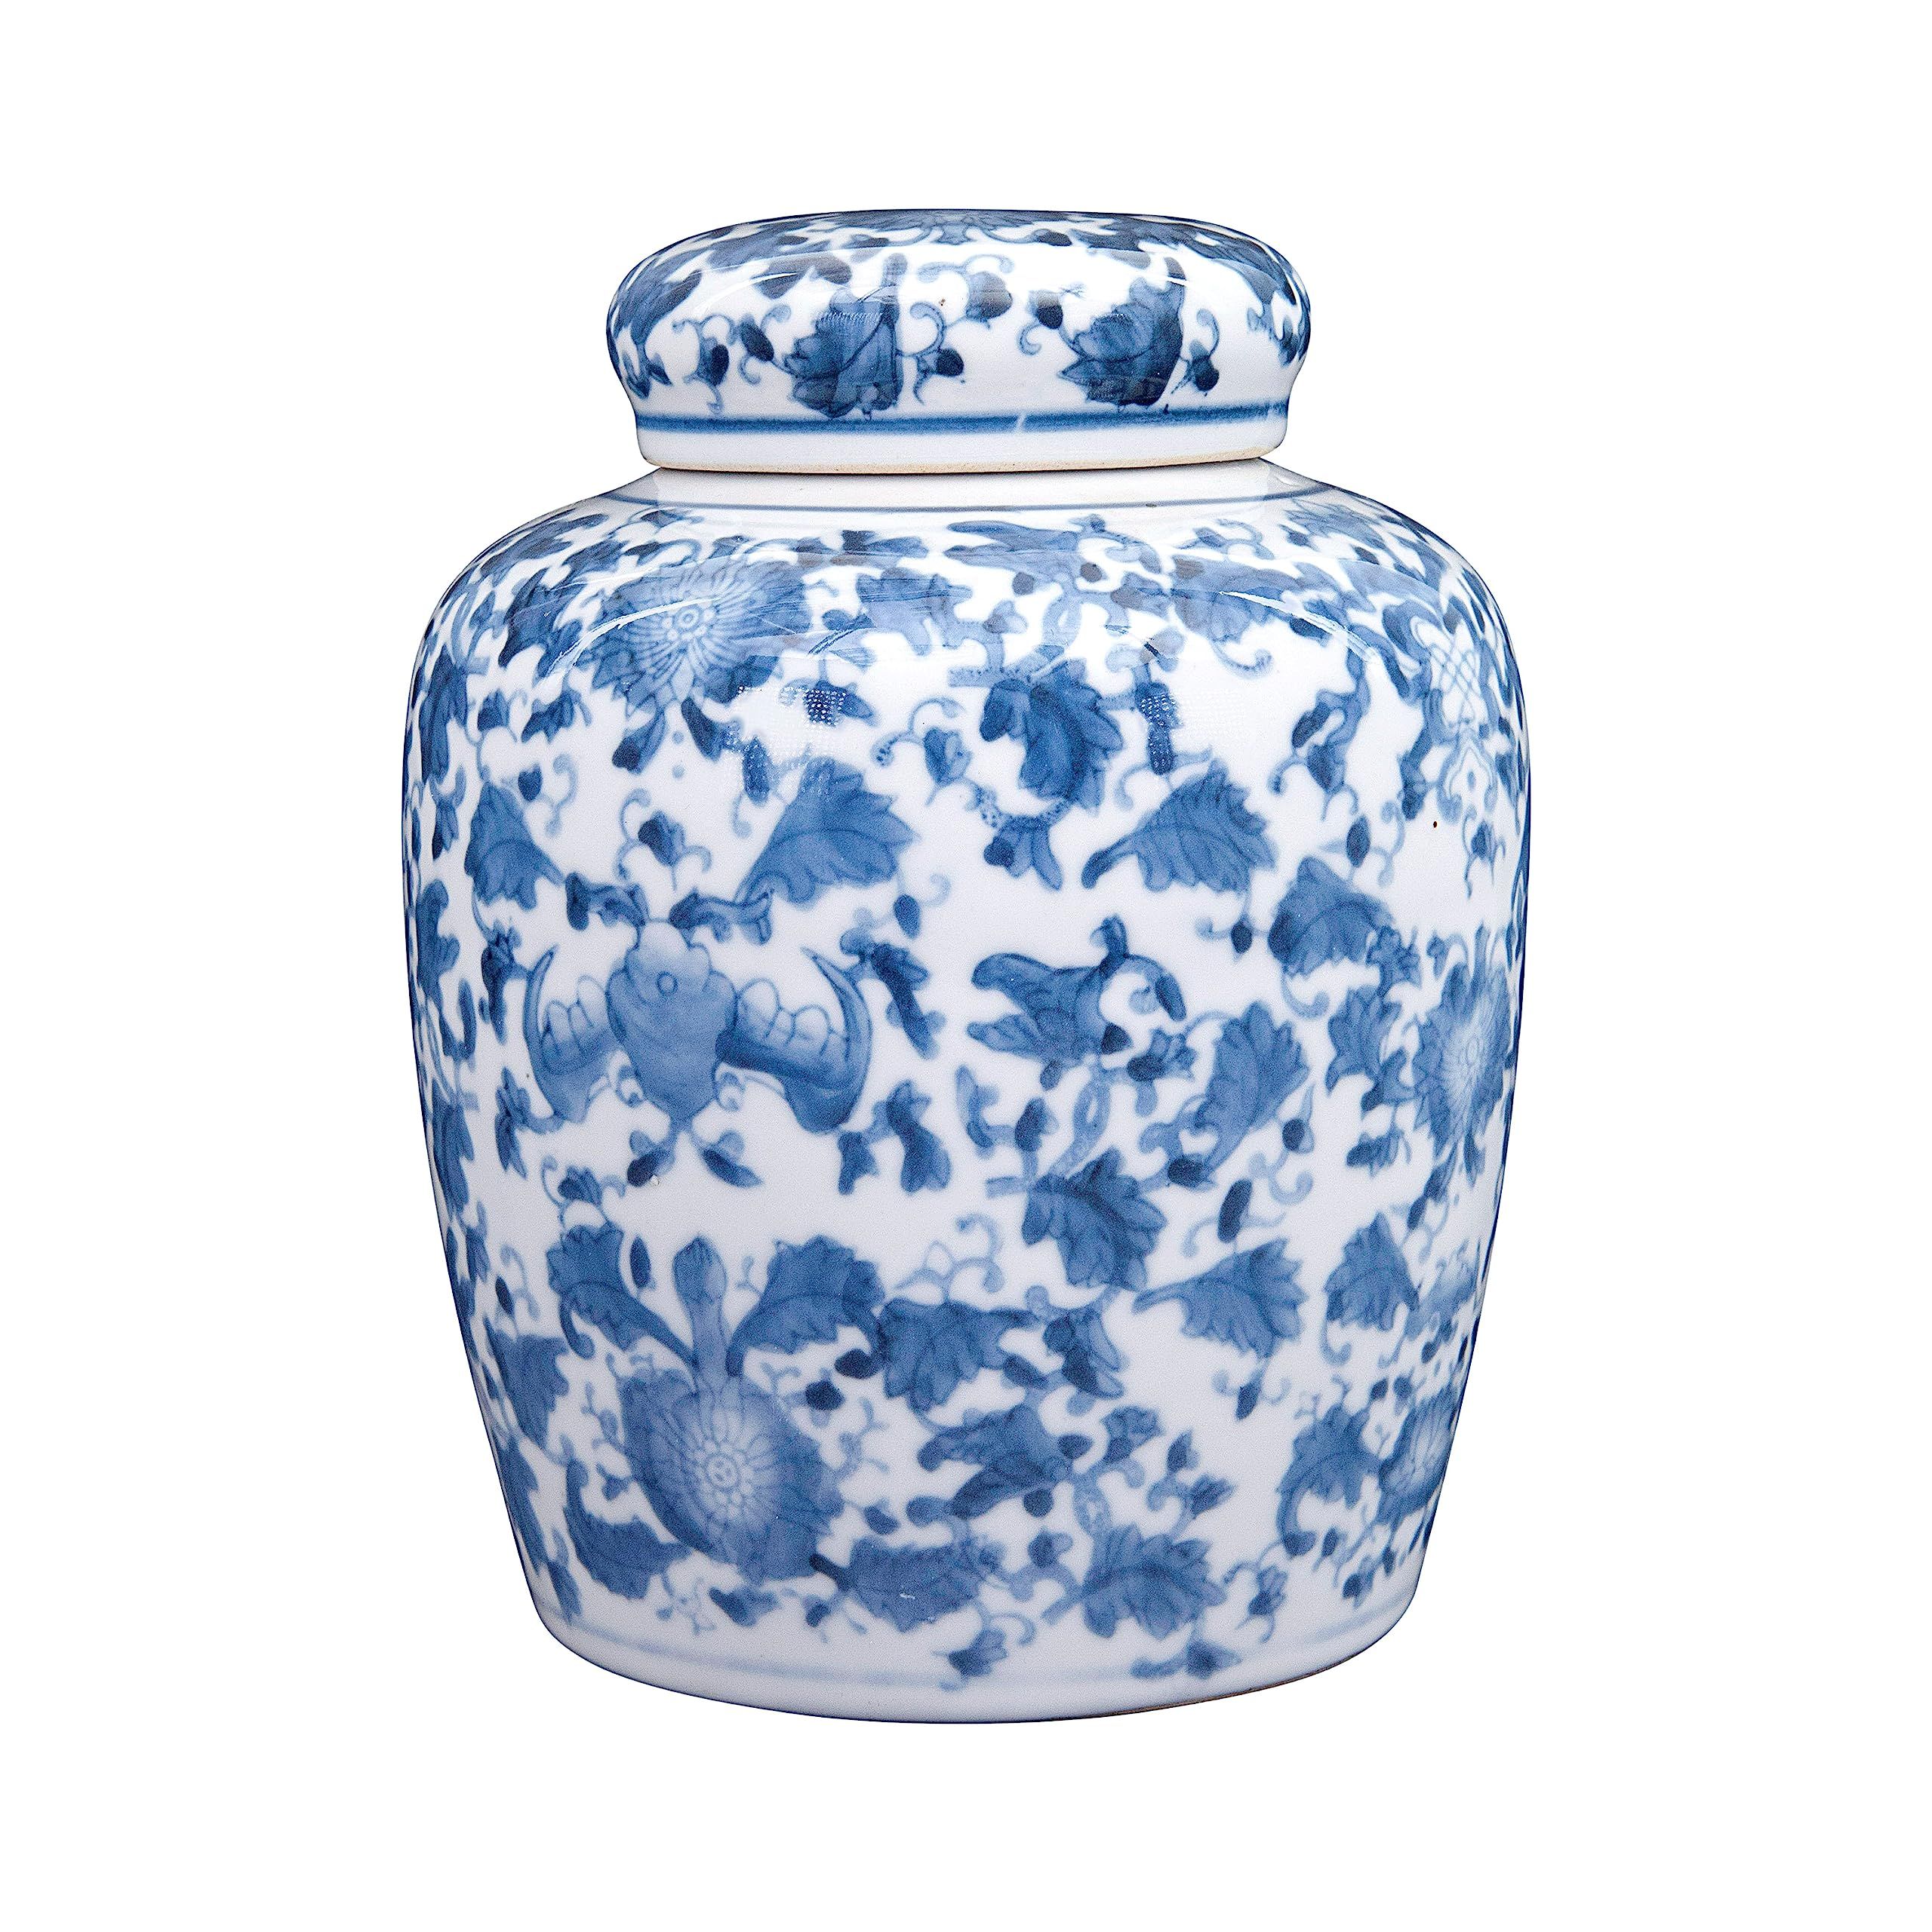 Decorative Blue and White Ceramic Ginger Jar with Lid | Amazon (US)